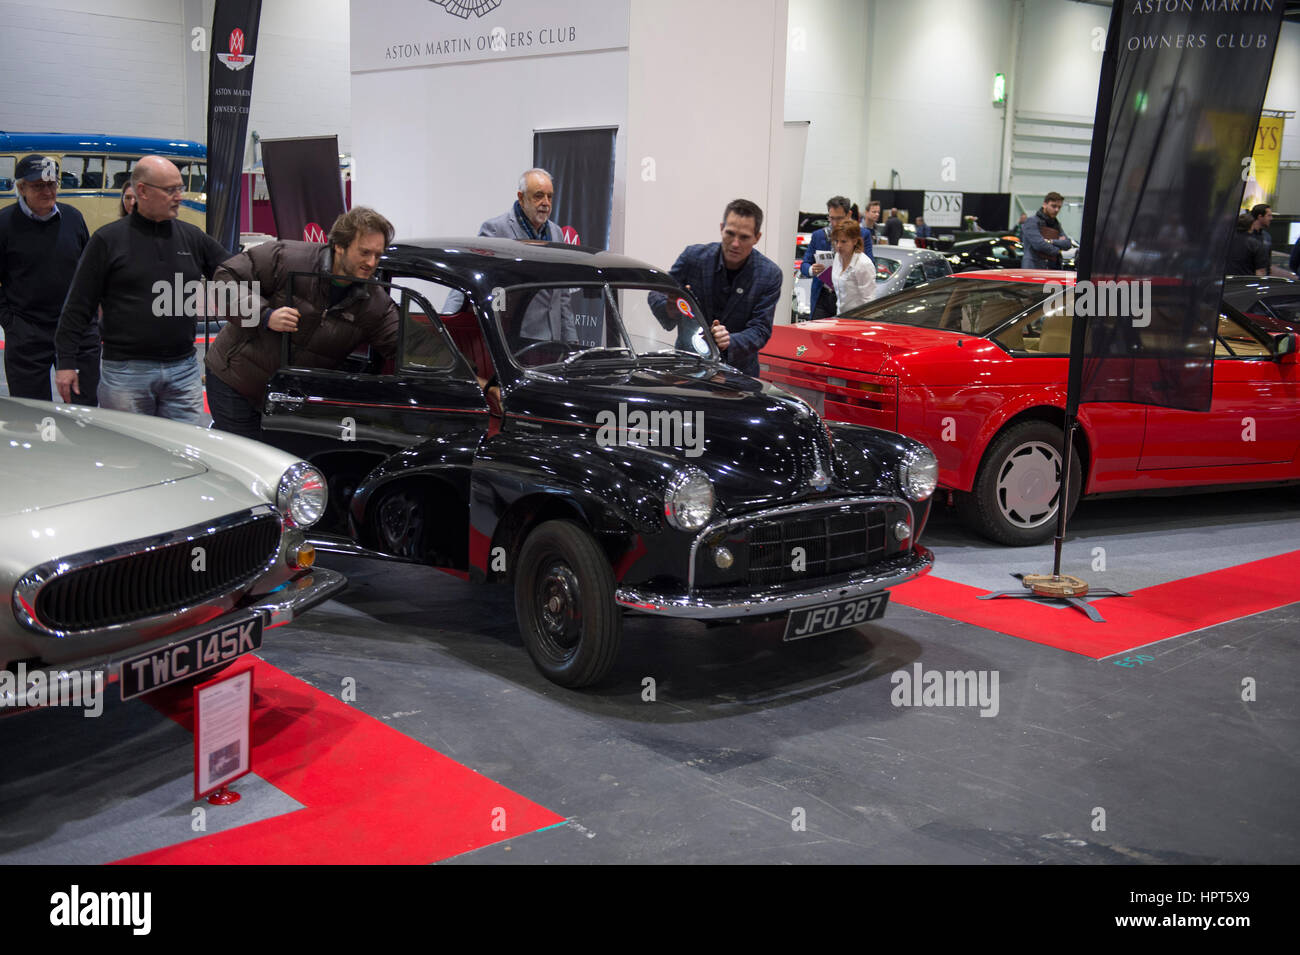 ExCel, London, UK. 23rd February, 2017. Opening day of the 2017 Classic Car Show with spectacular coupes, saloons and racing cars displayed around the Grand Avenue. A late arrival to the Car Club Square is pushed into position. Credit: Malcolm Park editorial/Alamy Live News. Stock Photo